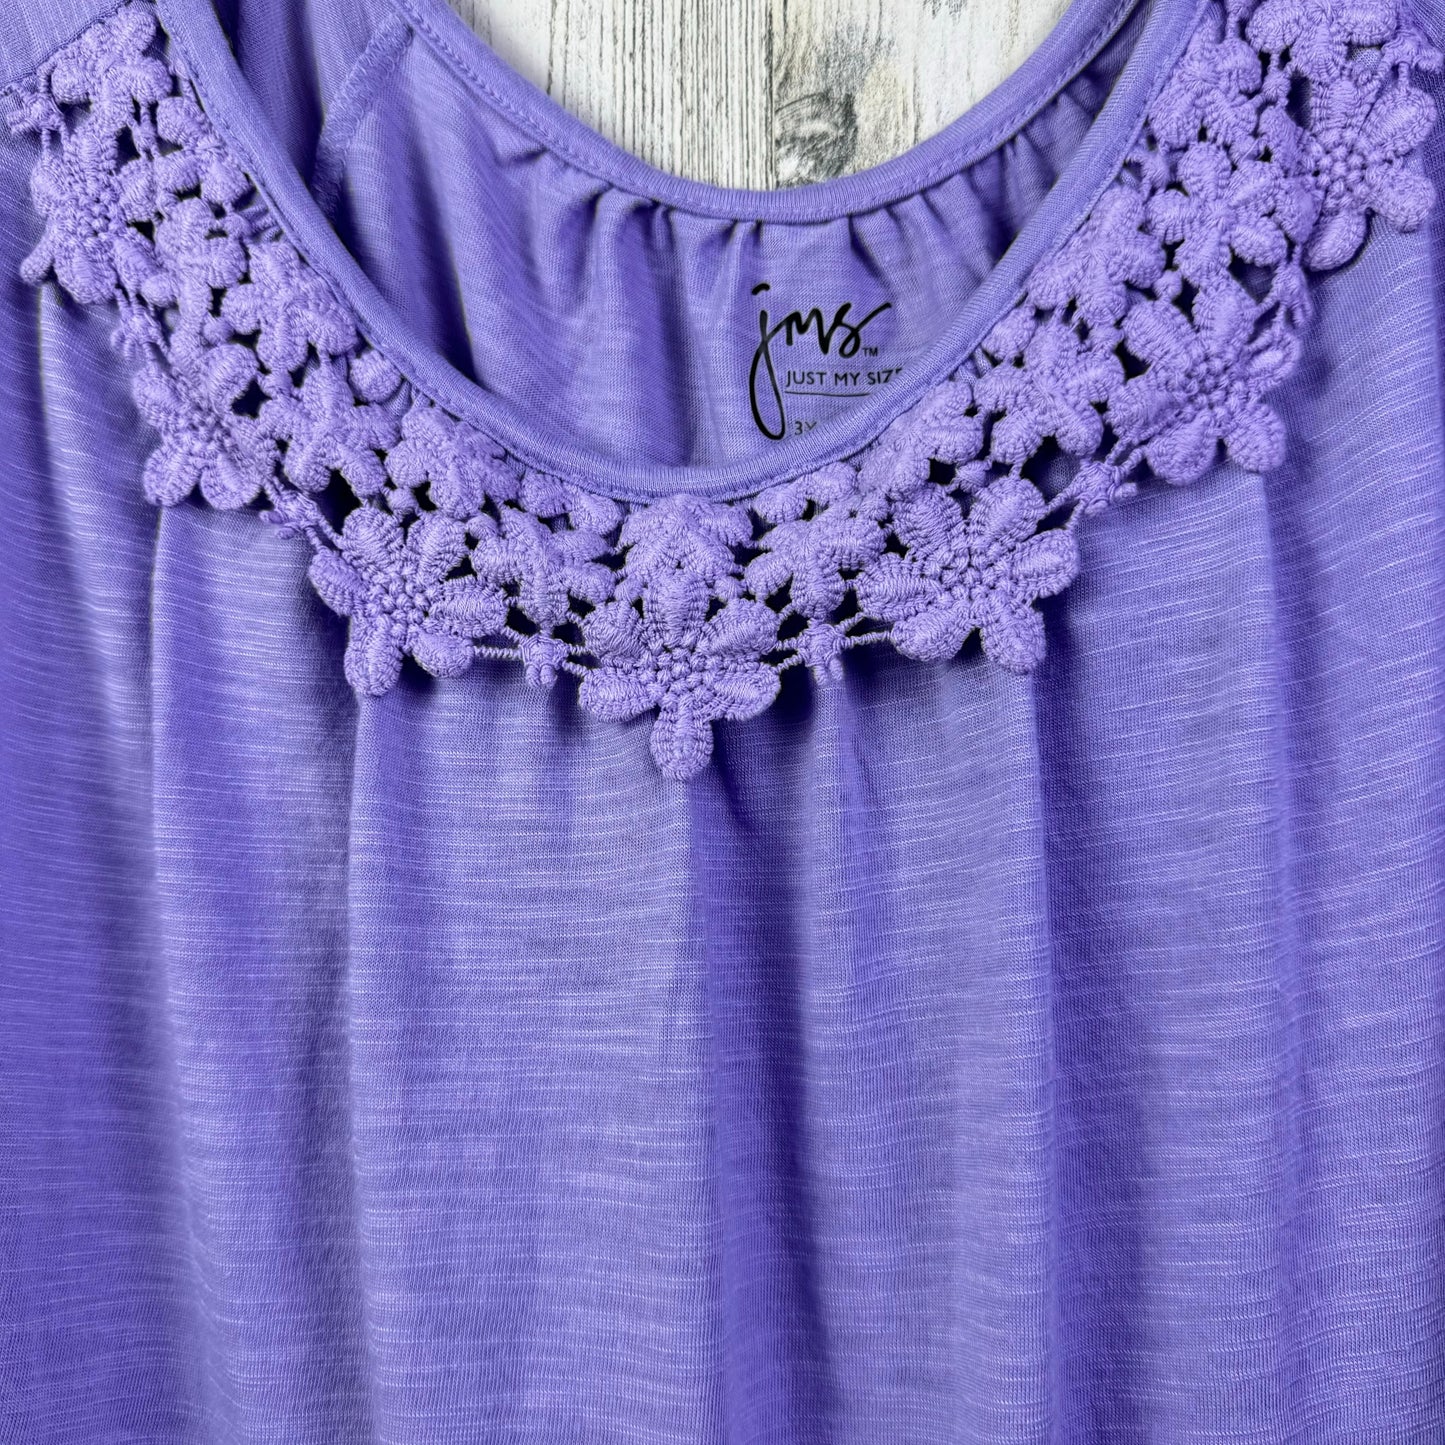 Purple Top Short Sleeve Basic Just My Size, Size 3x